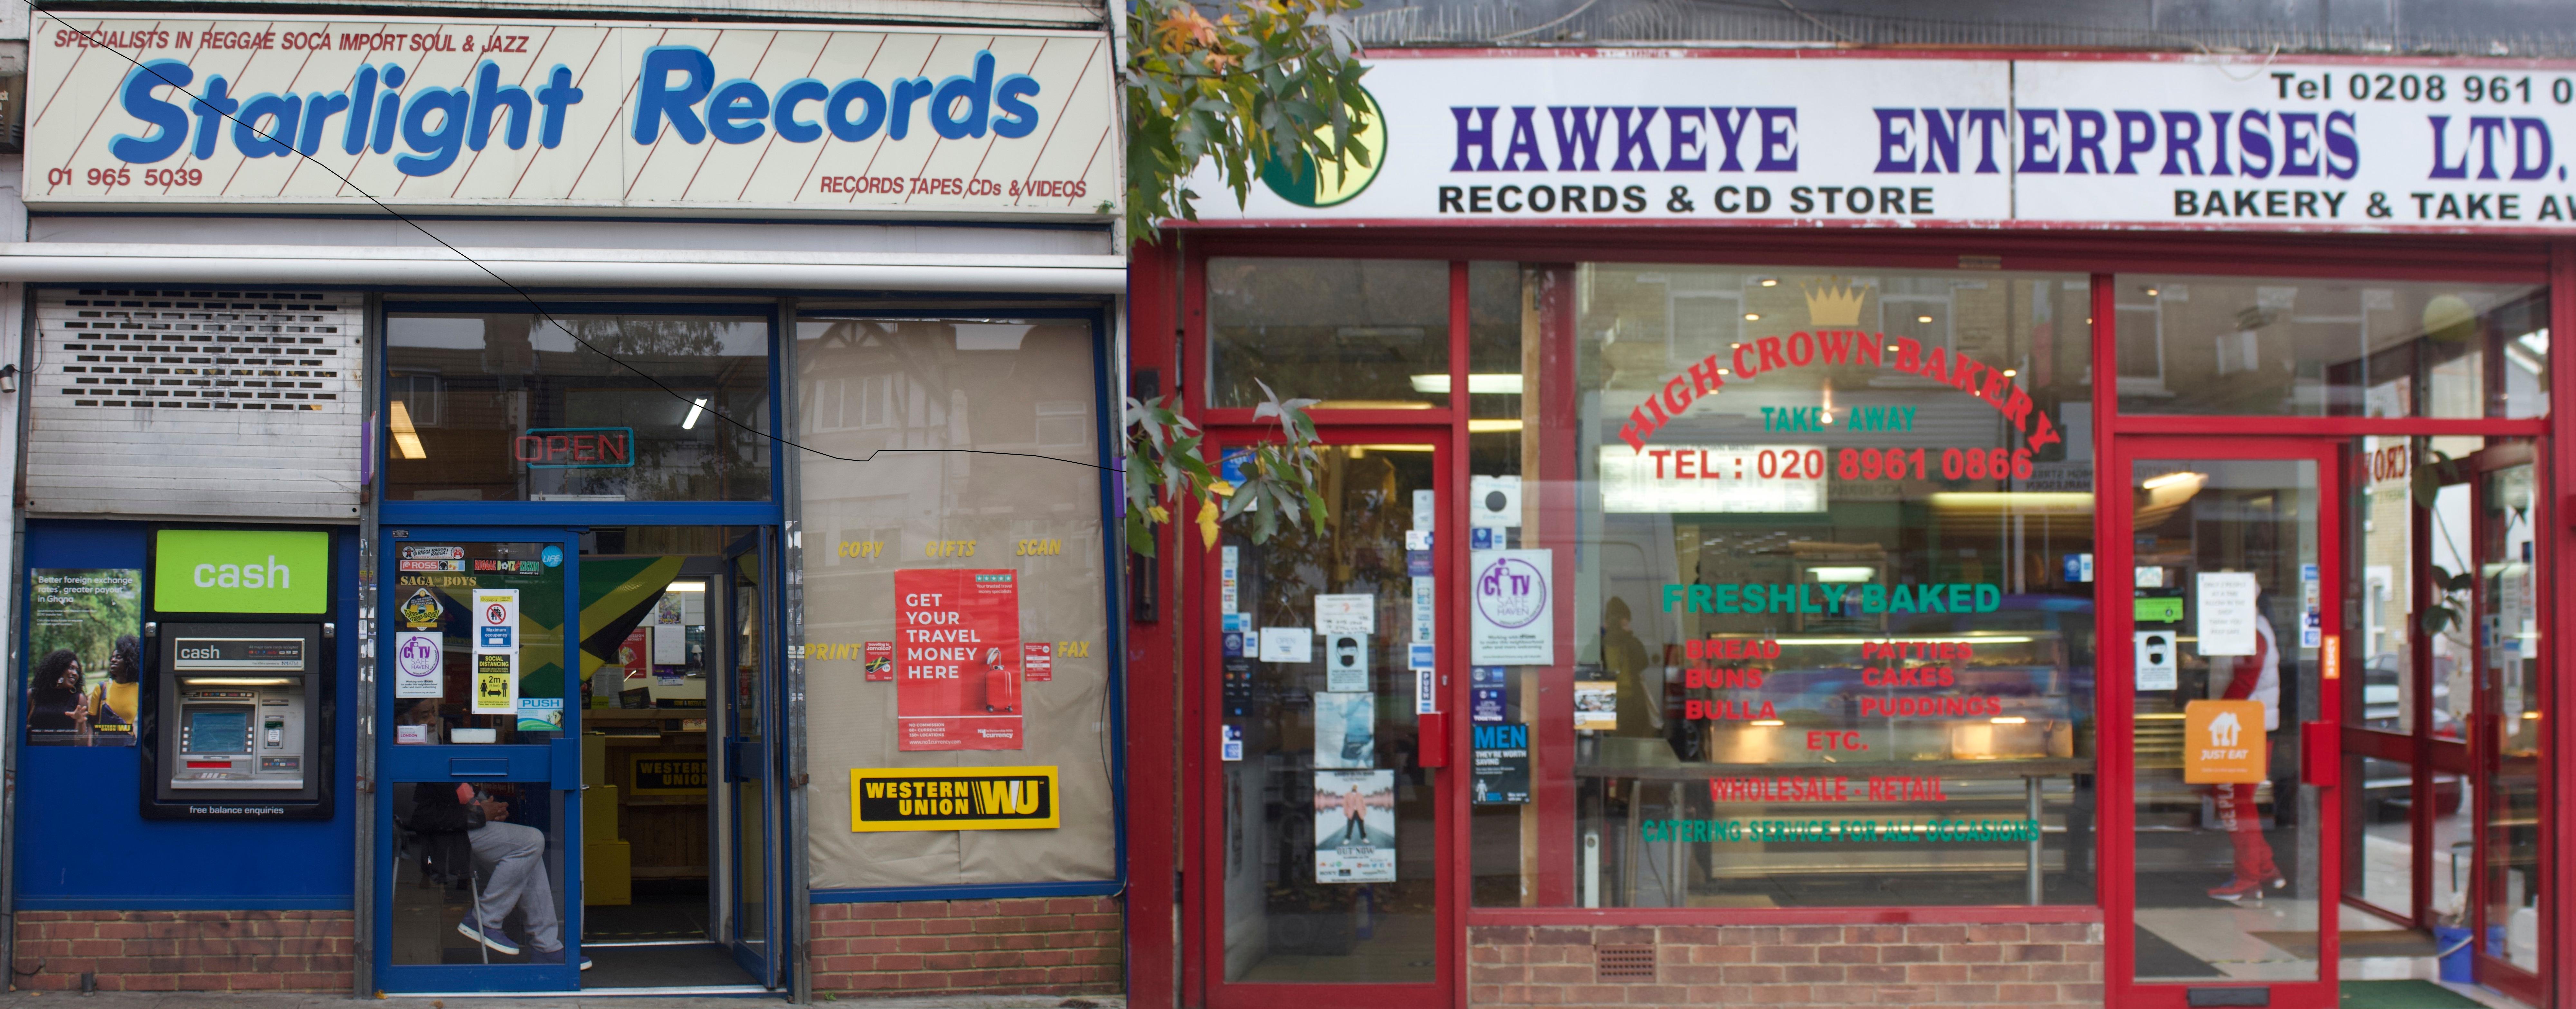 Colour photographs of two shopfronts in Harlesden, ‘Starlight Records’ and ‘Hawkeye Enterprises Ltd’.